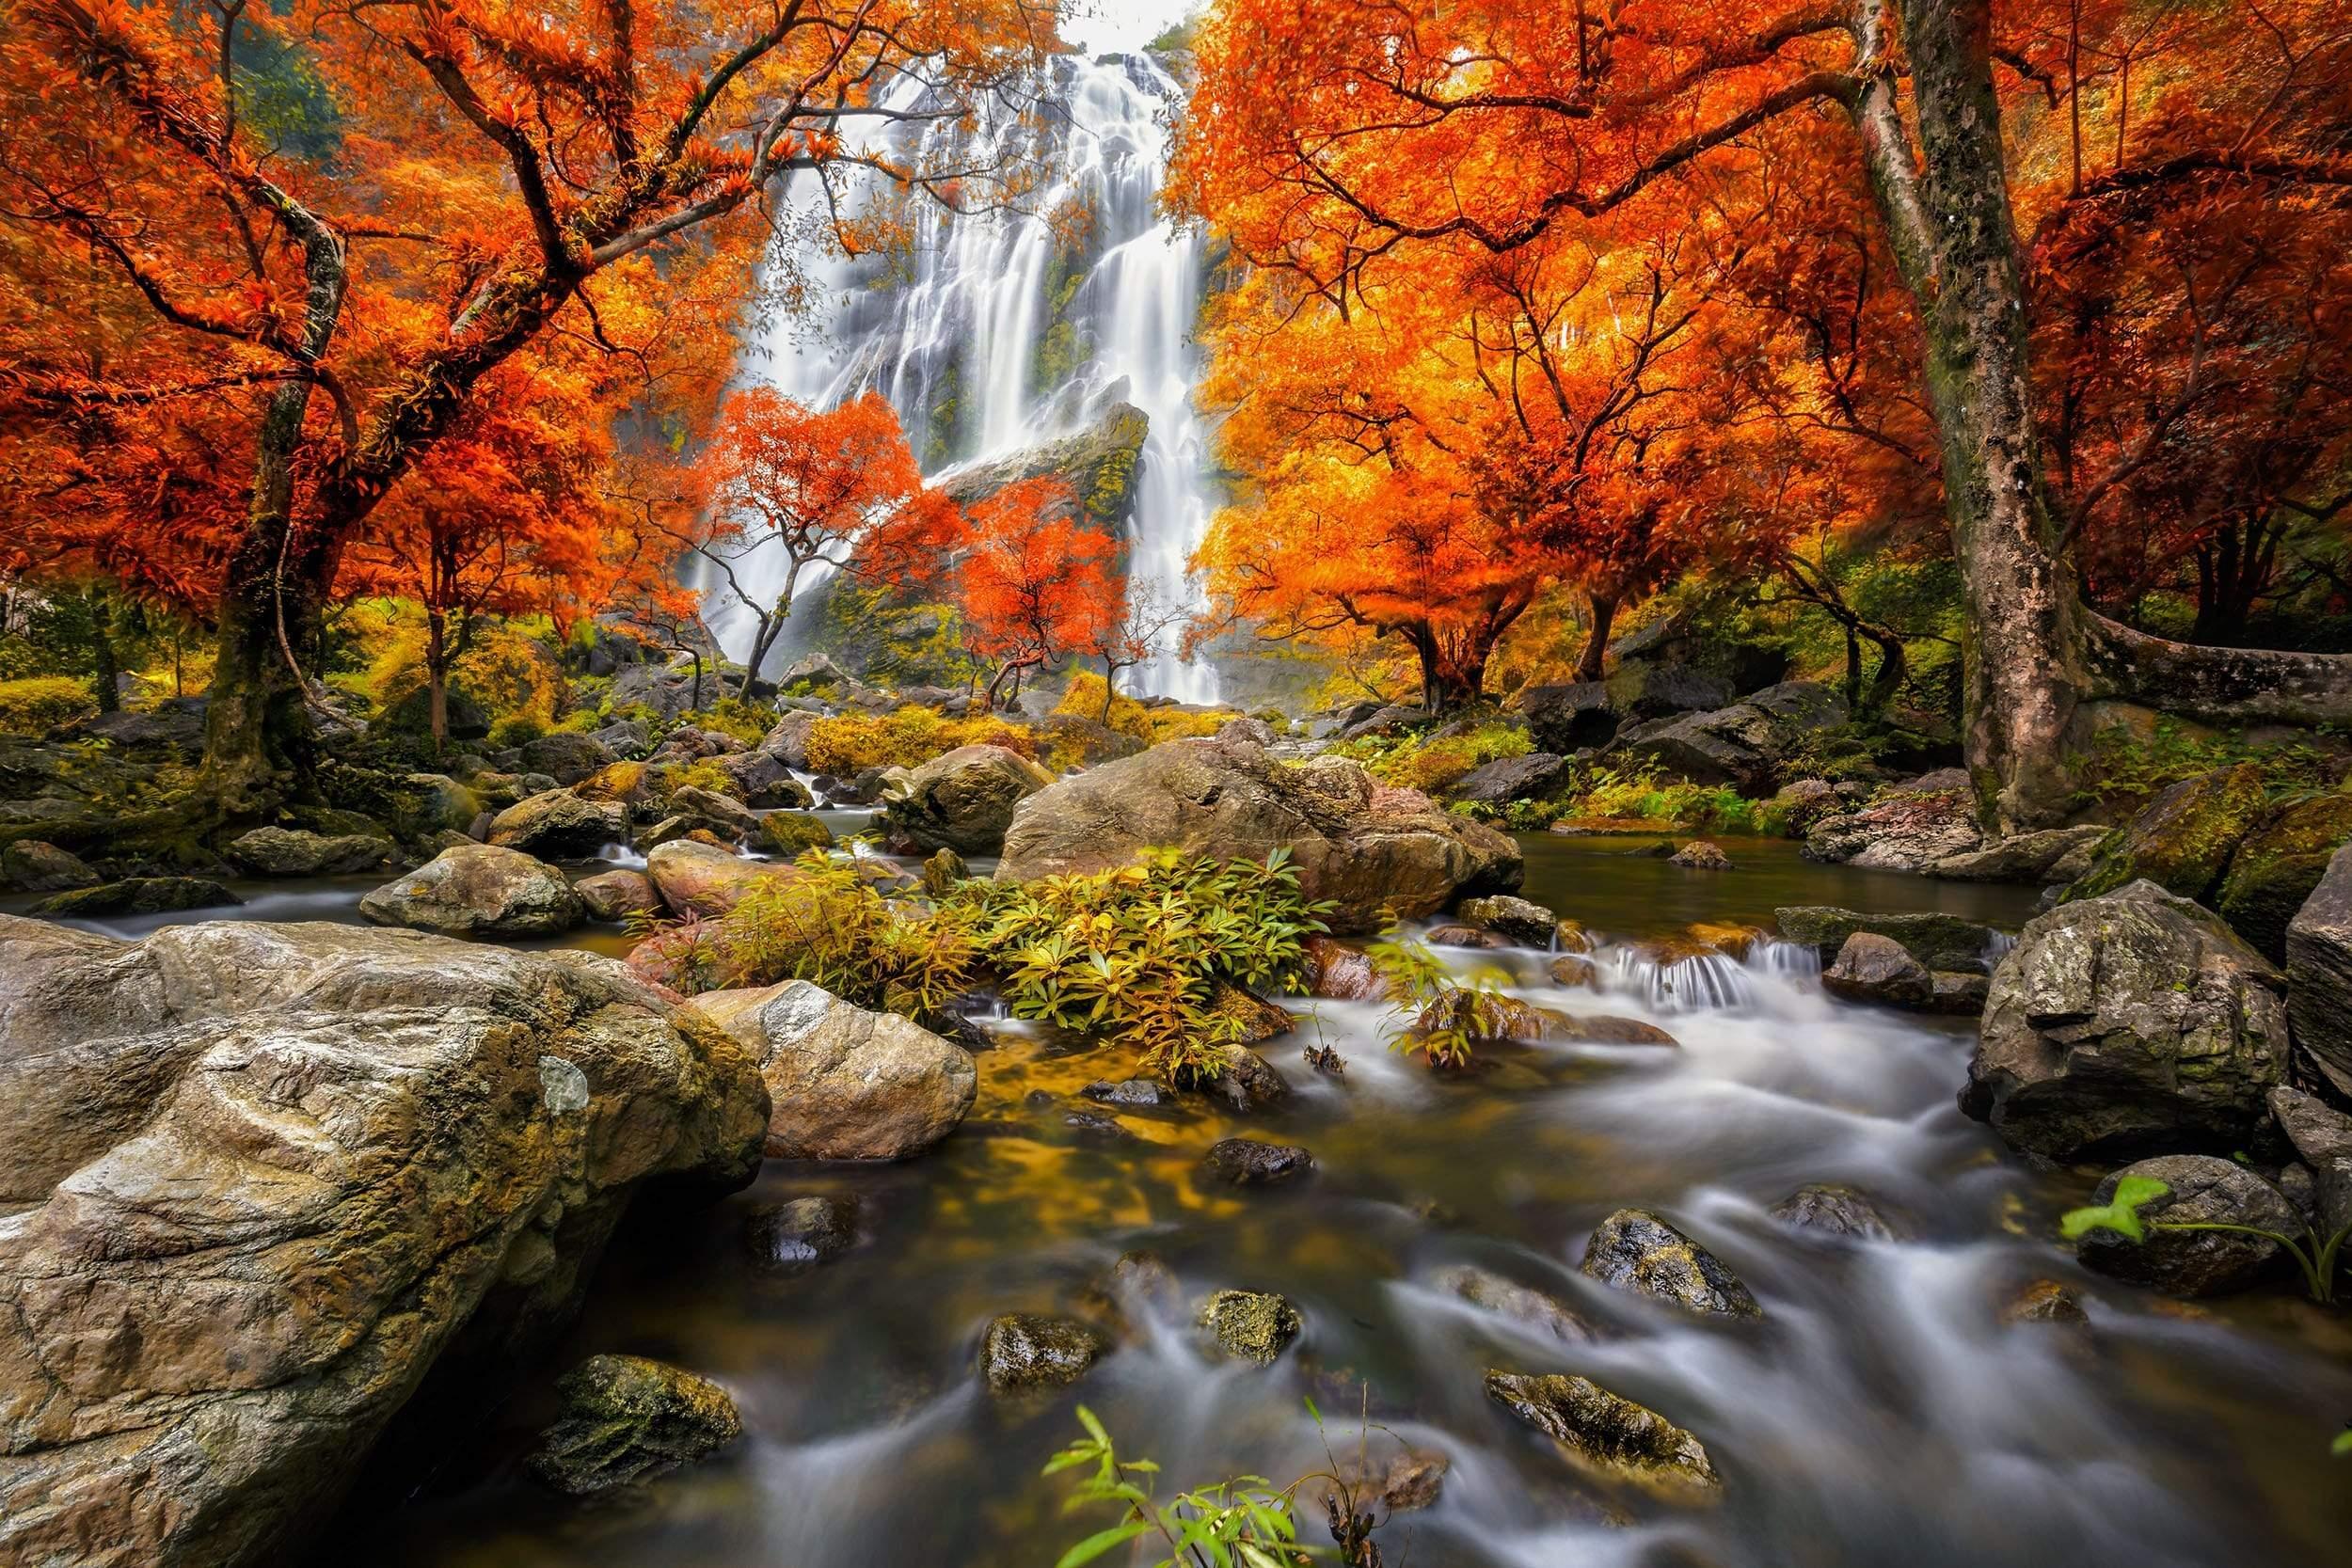 Magestic Waterfall with Fall colours